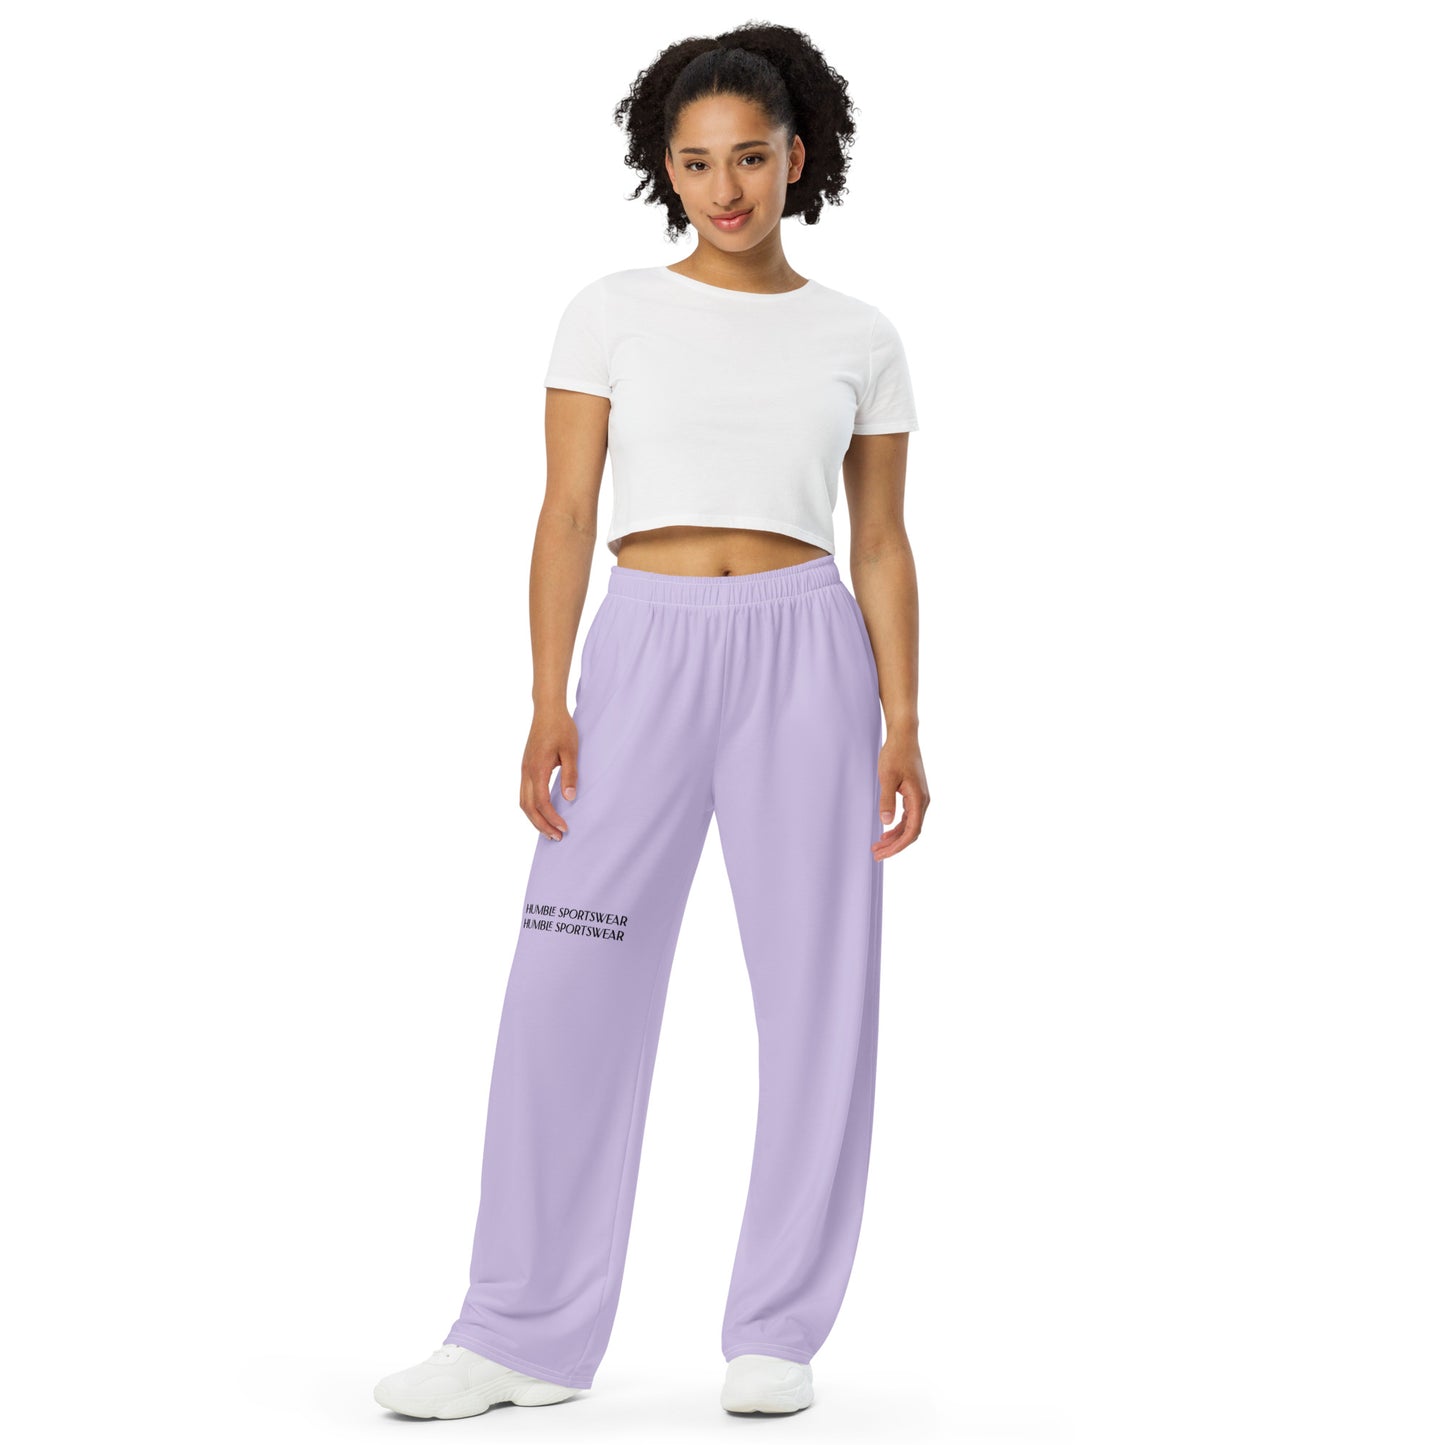 Humble Sportswear, women’s color match bottoms, women’s lounge pants, women’s yoga players, women’s active bottoms, casual pants for women